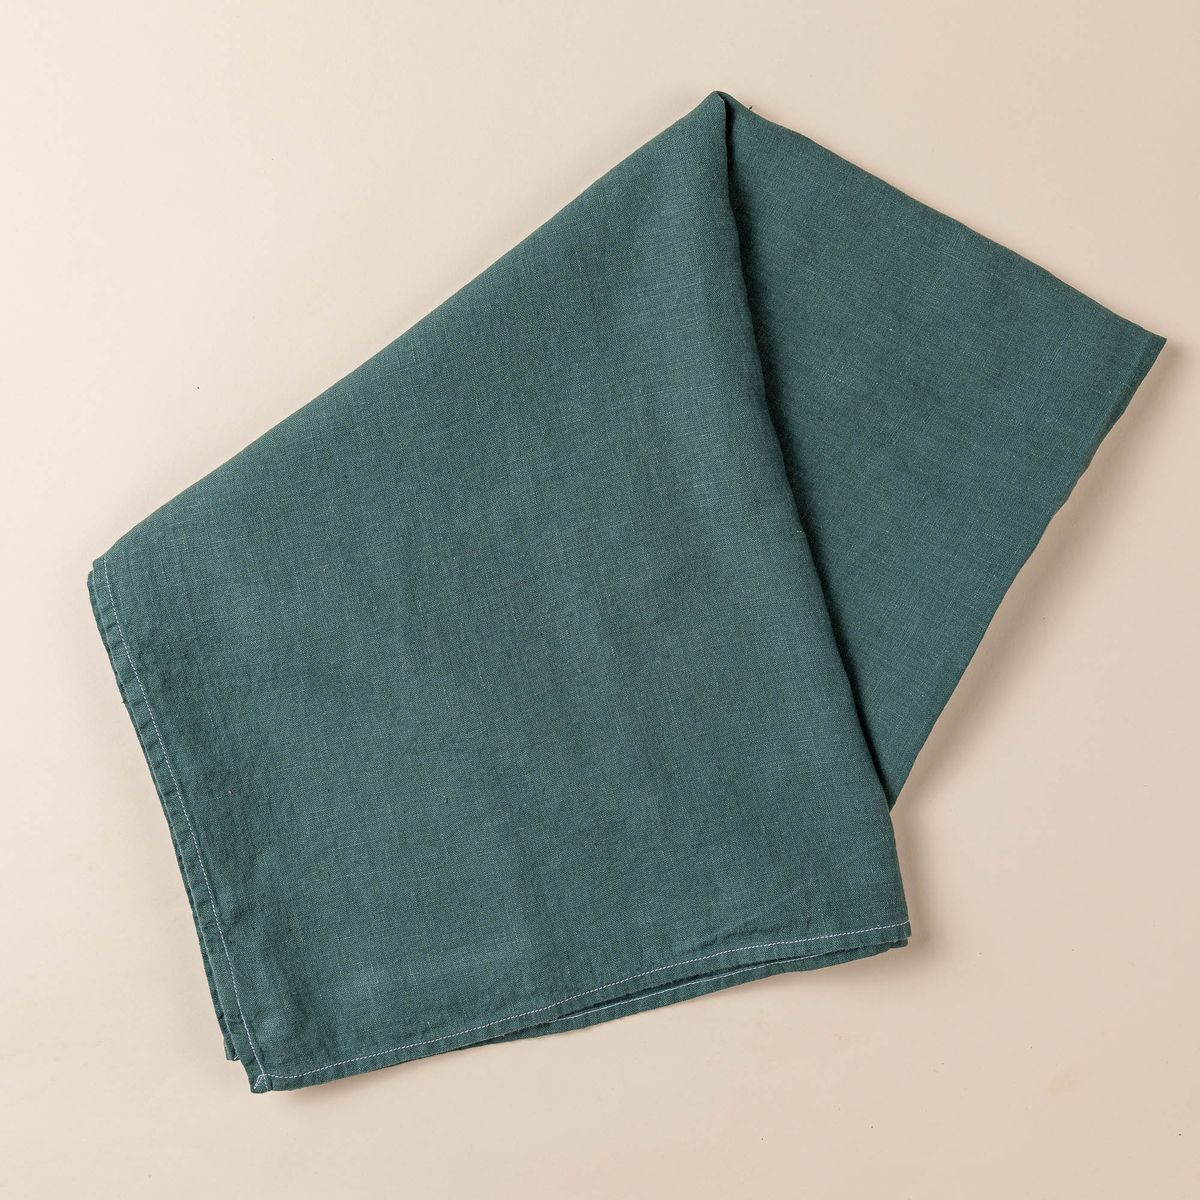 A folded linen tablecloth in a solid deep teal color